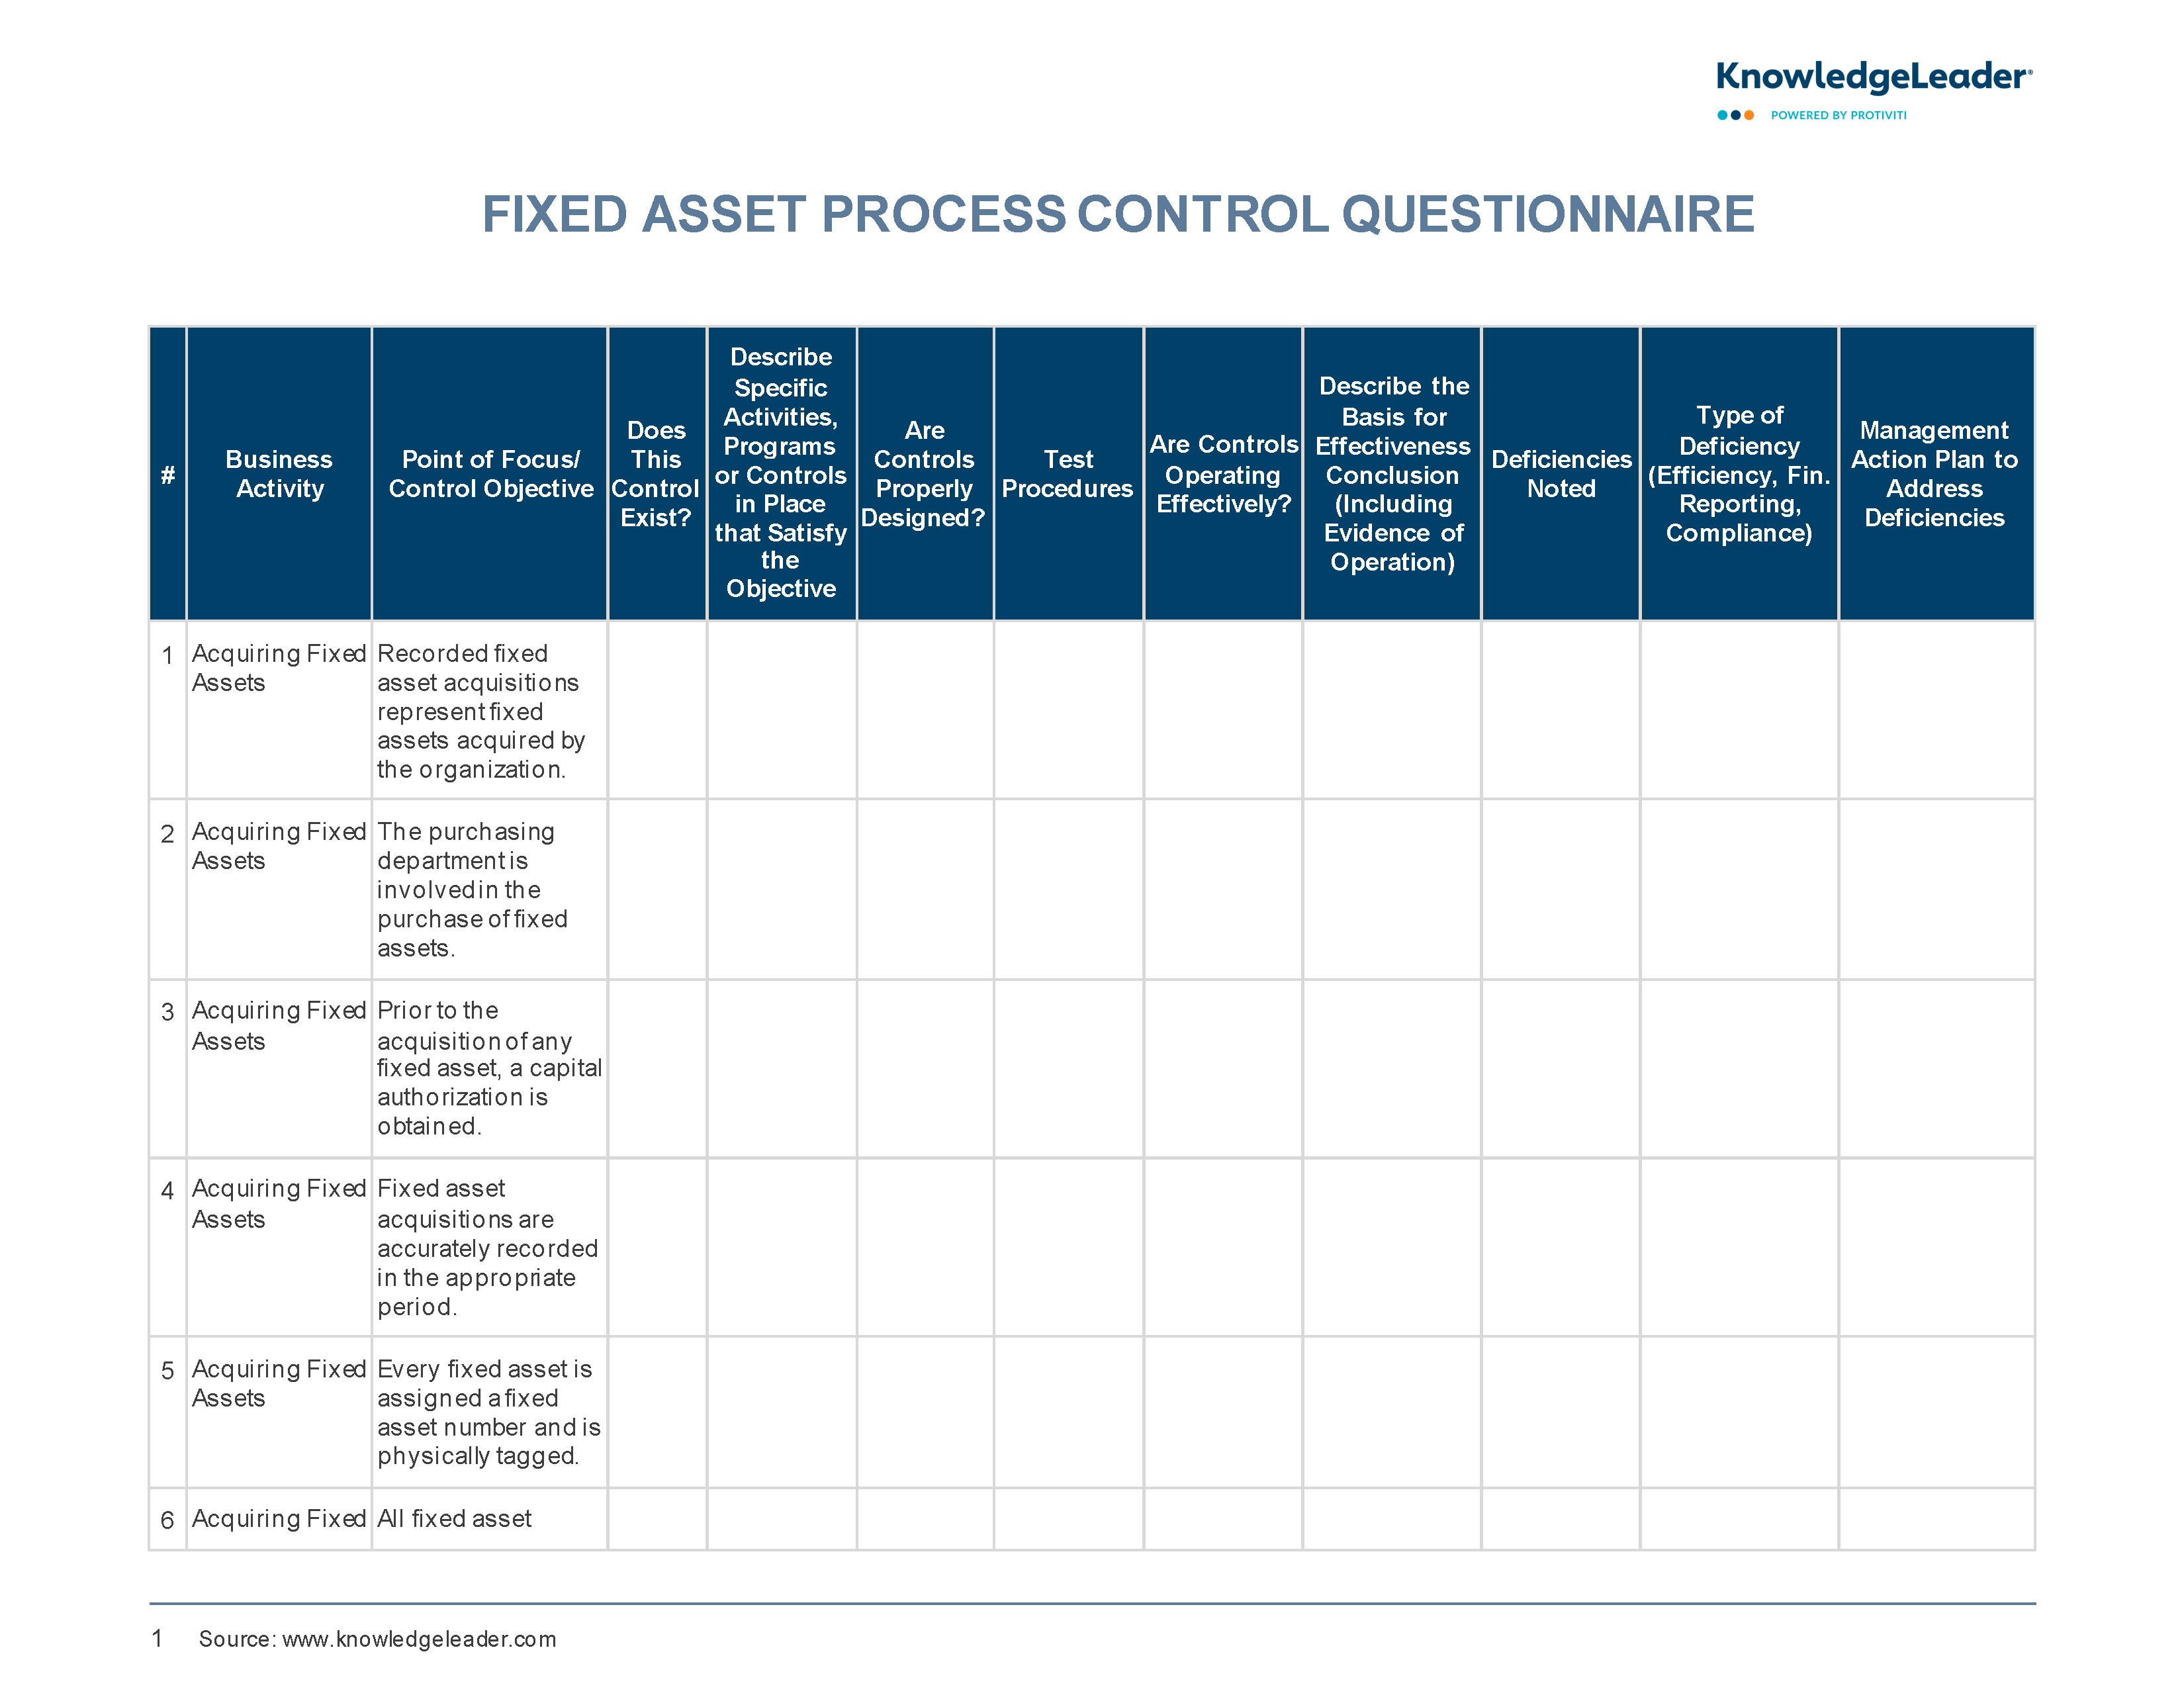 Screenshot of the first page of Fixed Asset Process Control Questionnaire